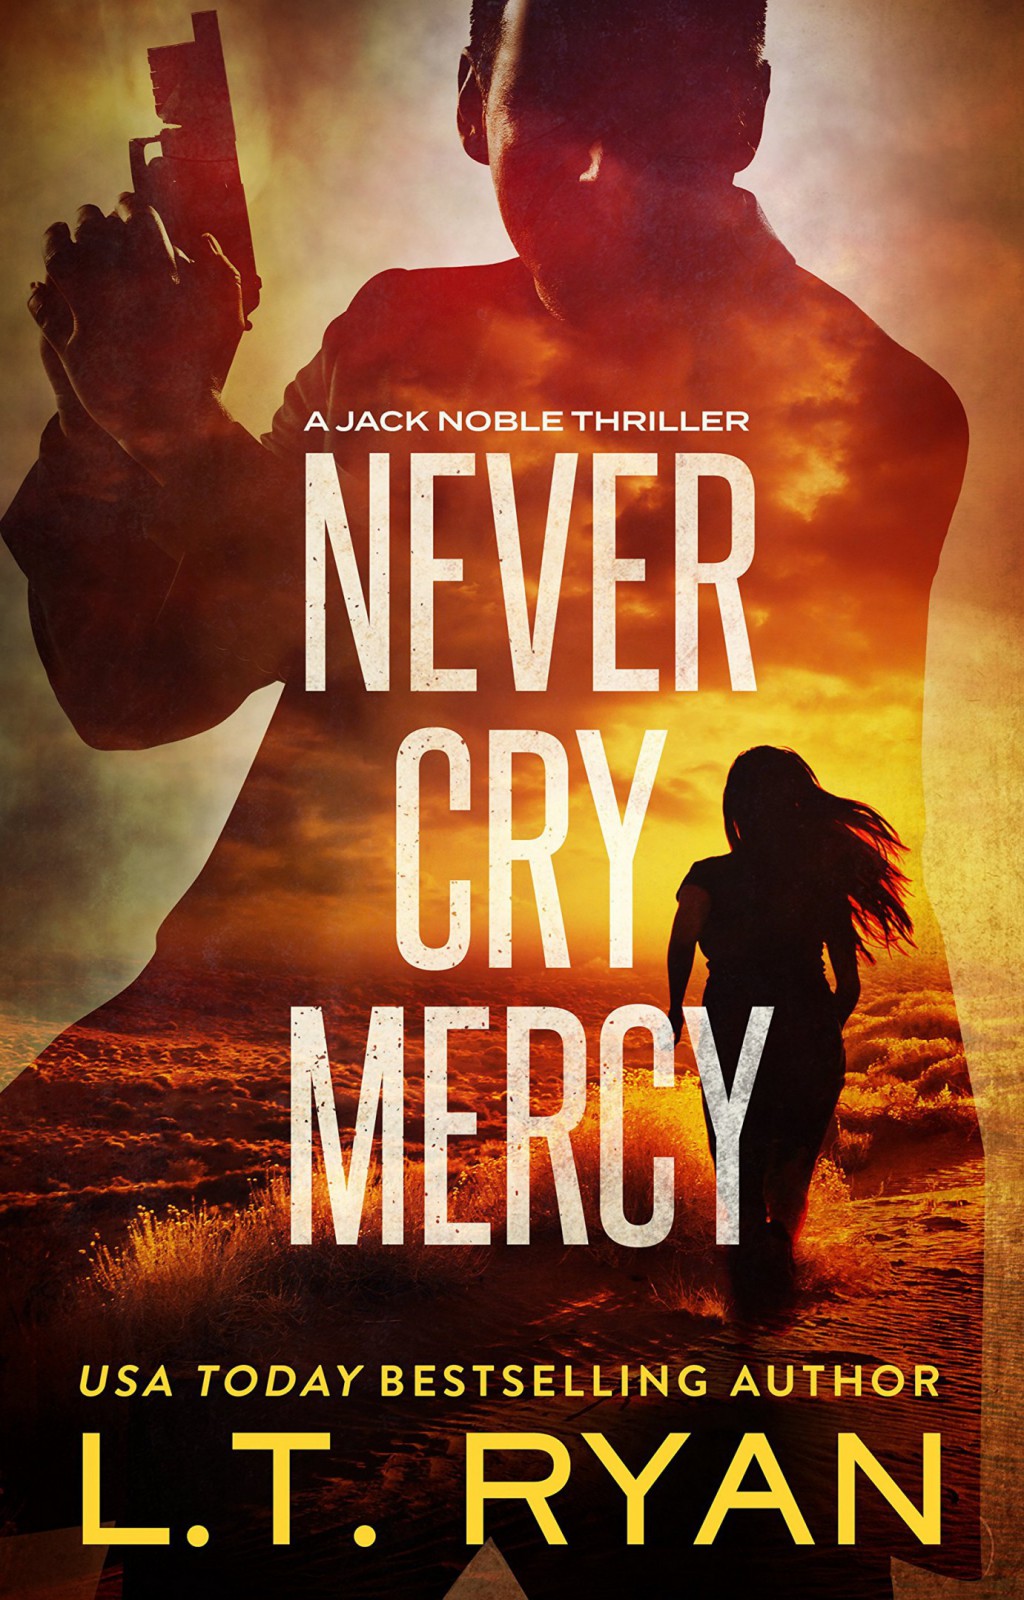 Never Cry Mercy by L. T. Ryan